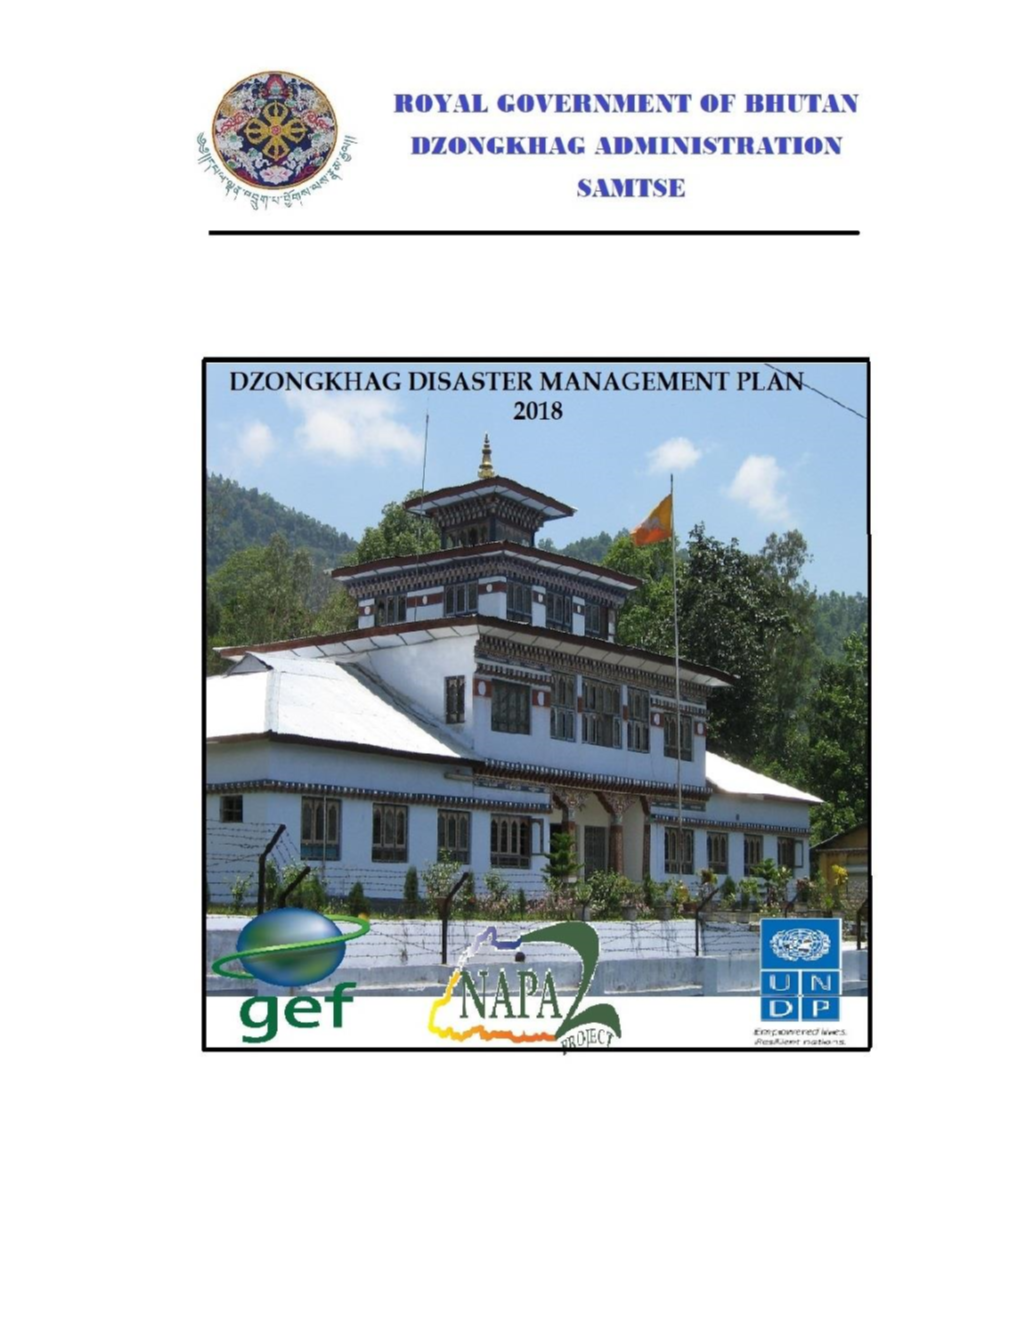 Samtse Dzongkhag and Subsequently Developing the Disaster Management and Contingency Plan for the Dzongkhag